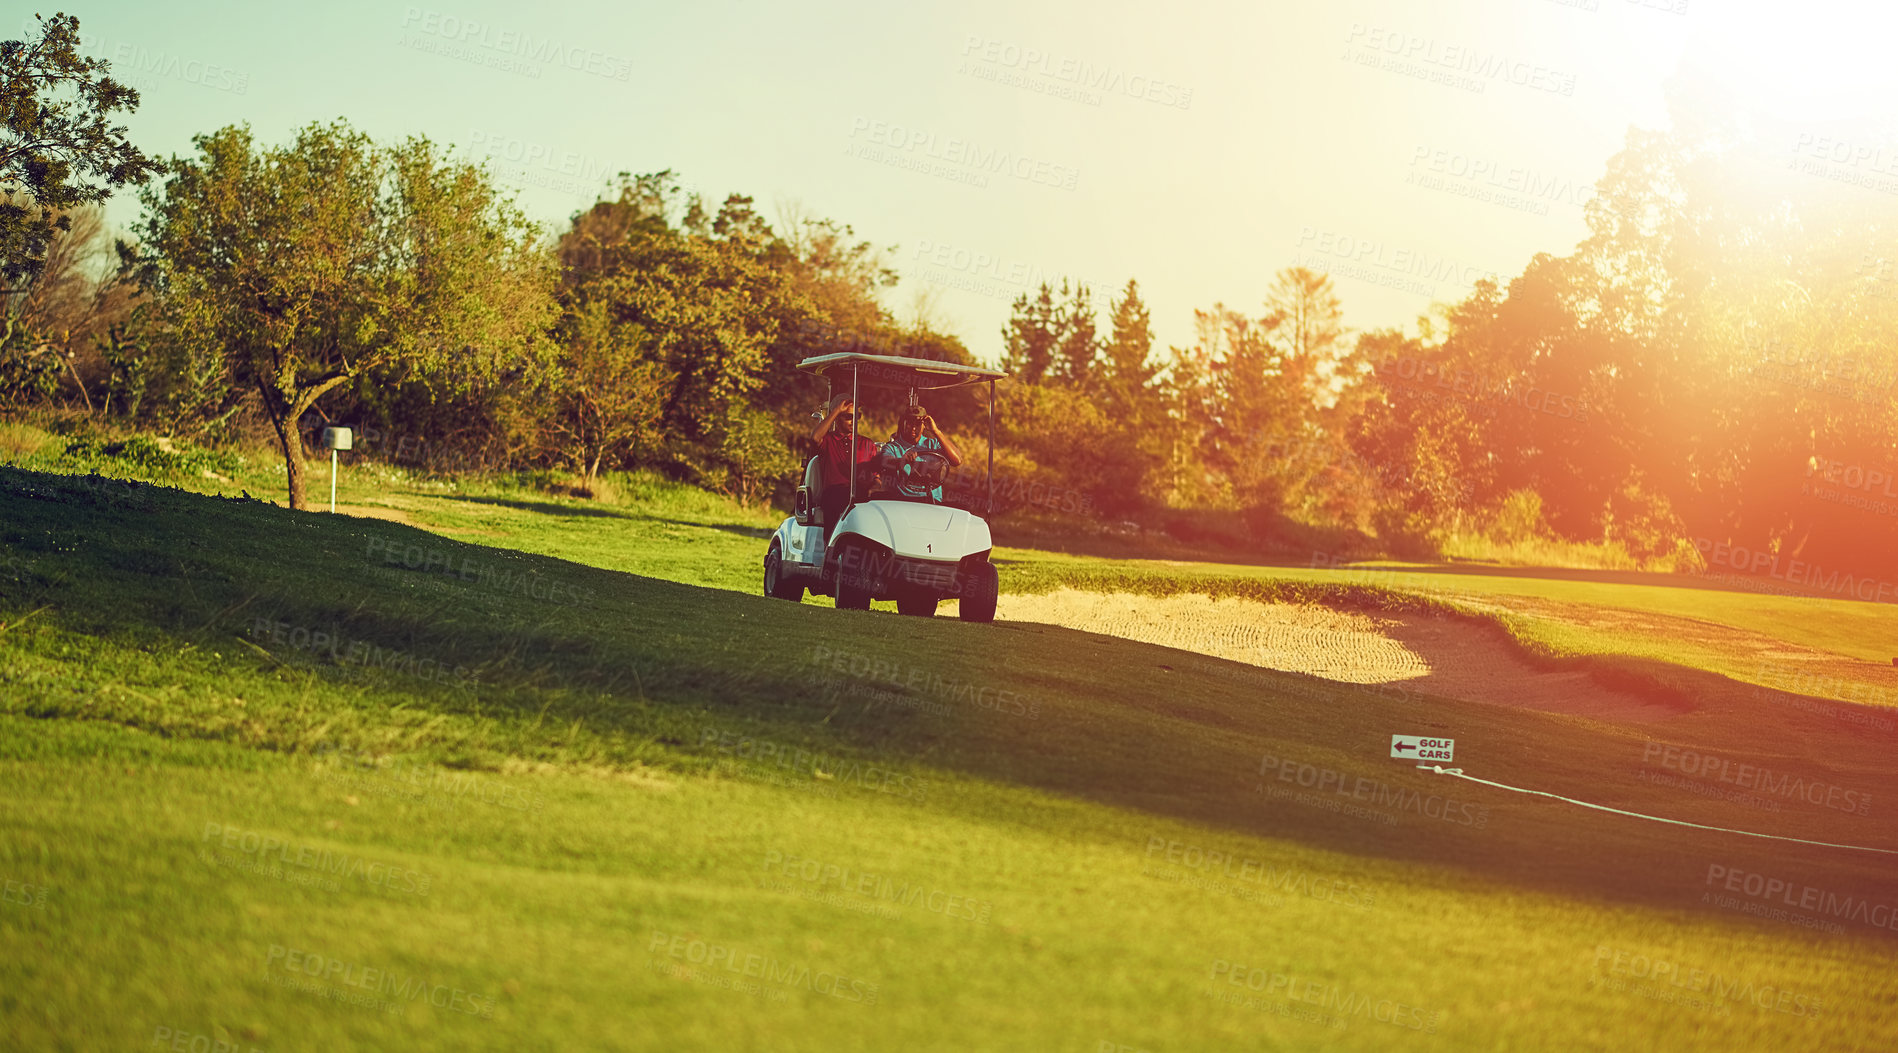 Buy stock photo Shot of two golfers riding in a cart on a golf course